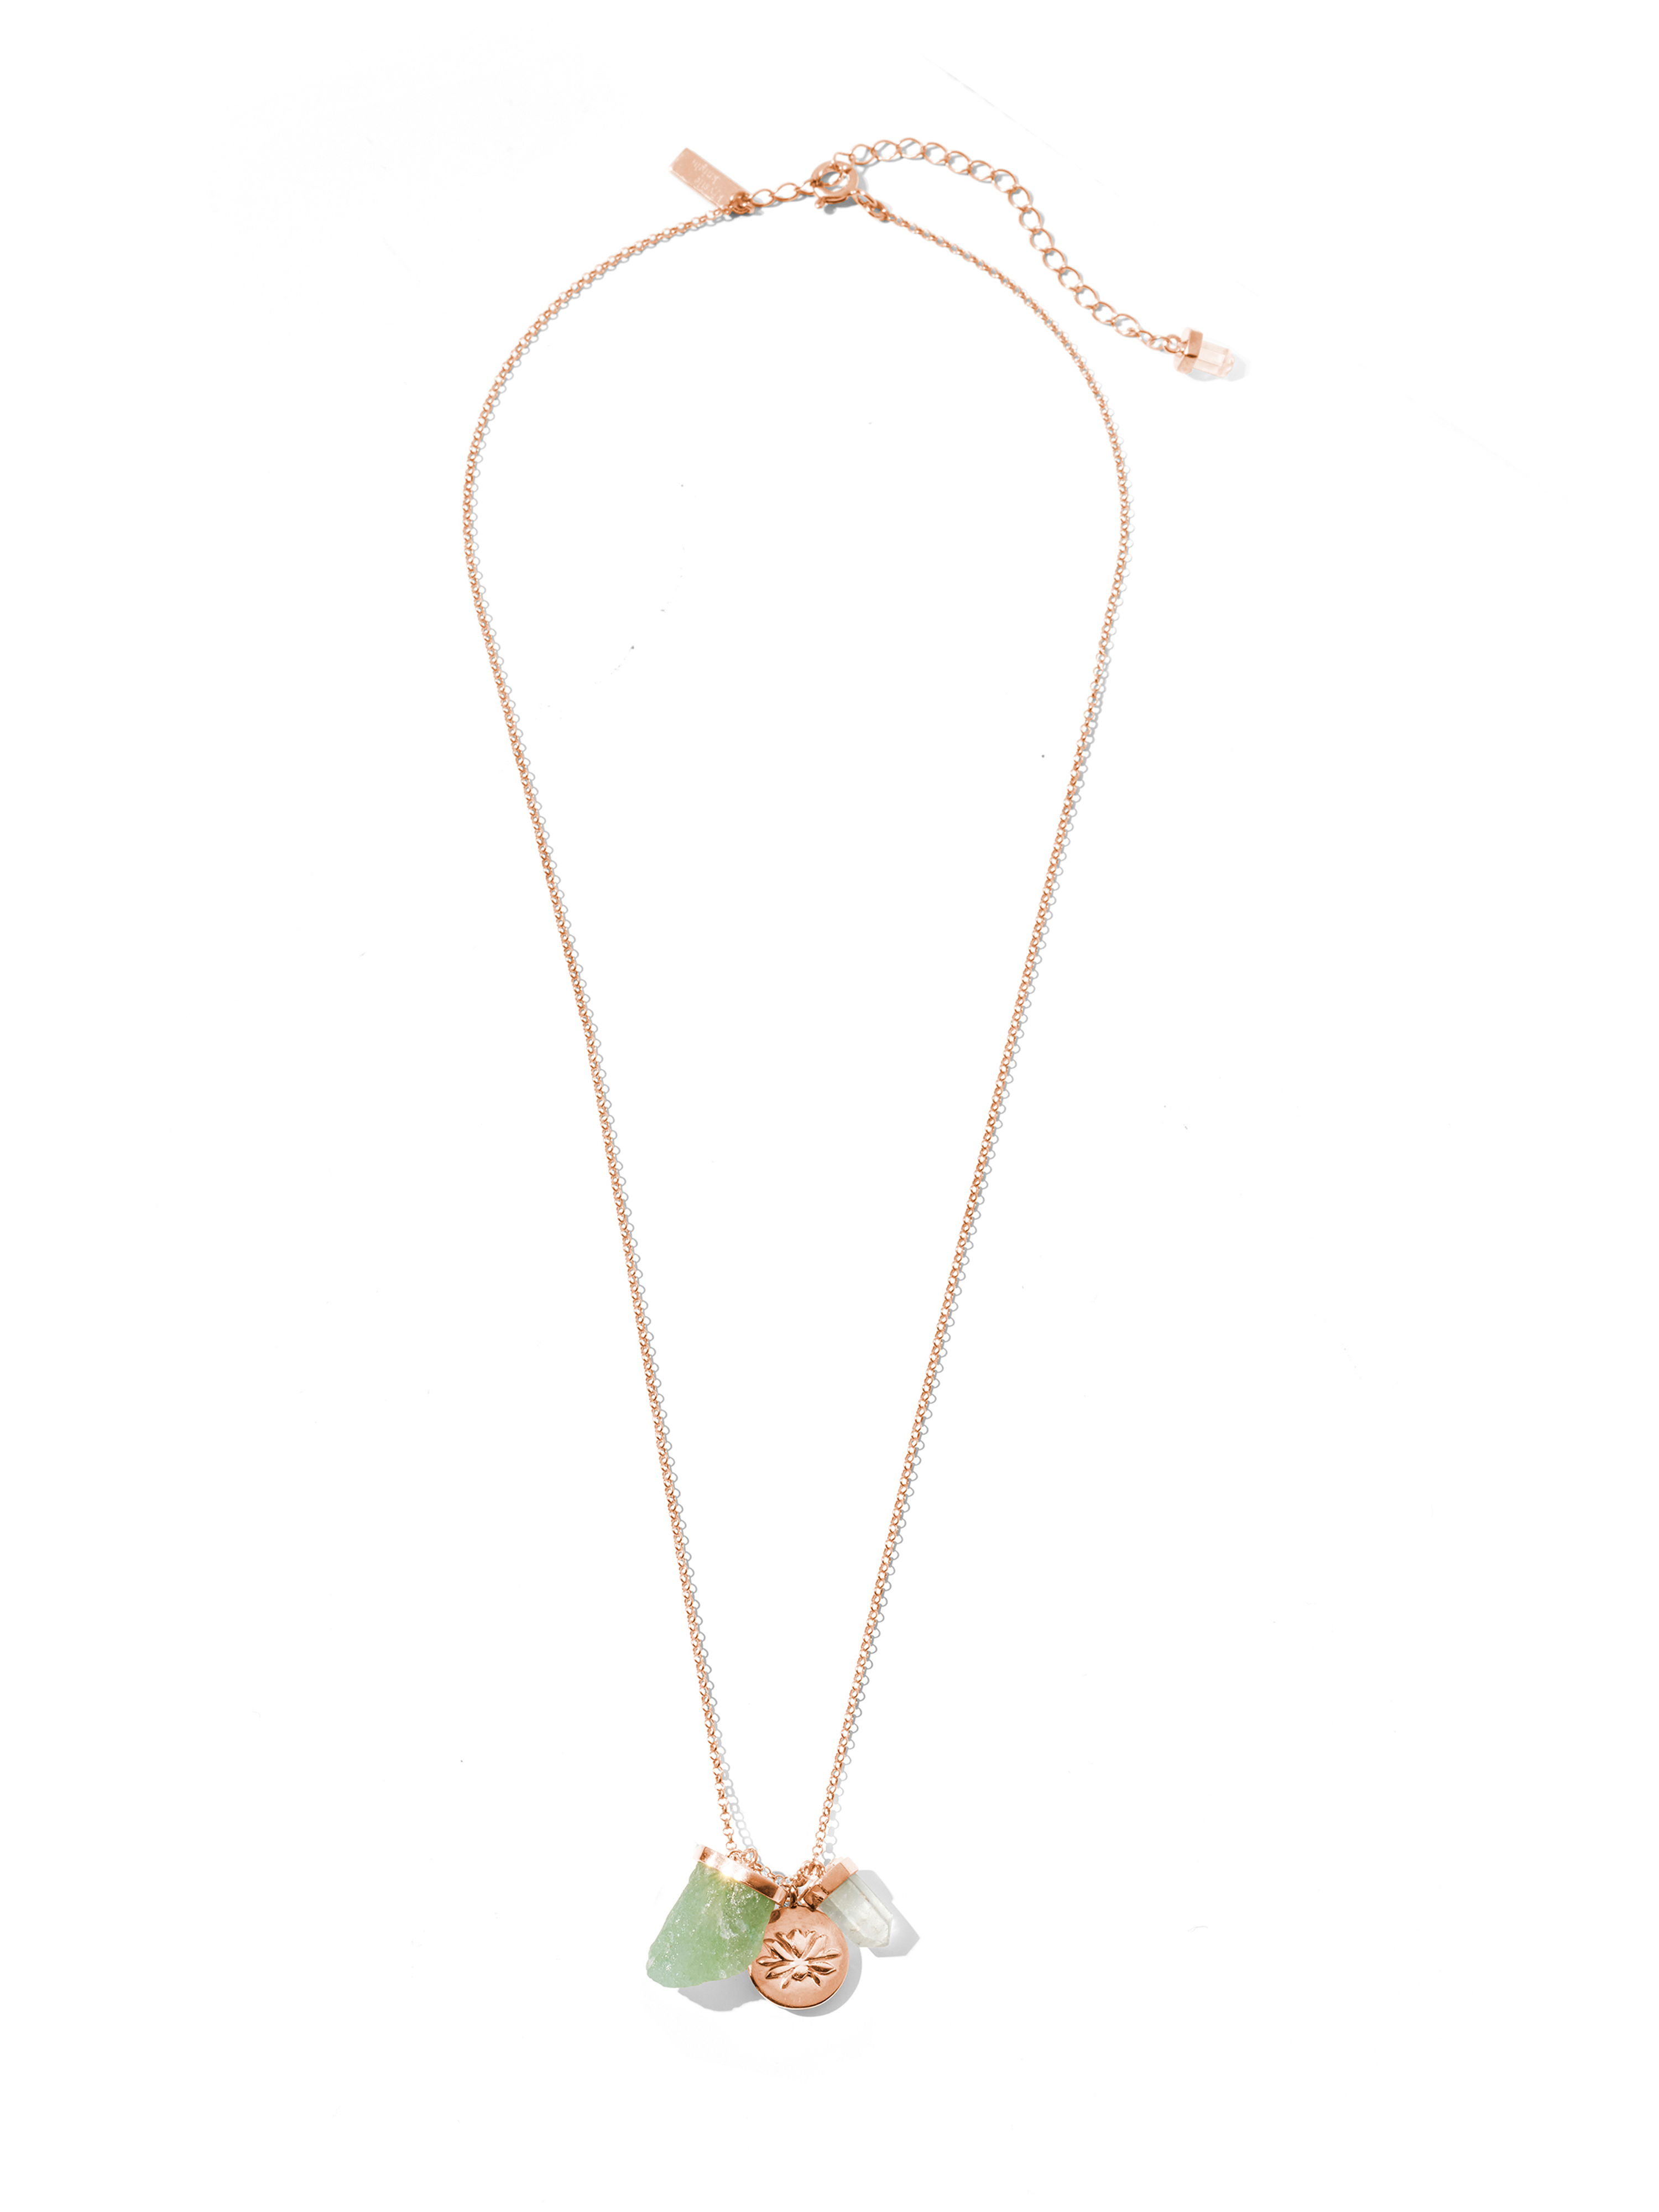 the lucky necklace | green aventurine, clear quartz + lotus